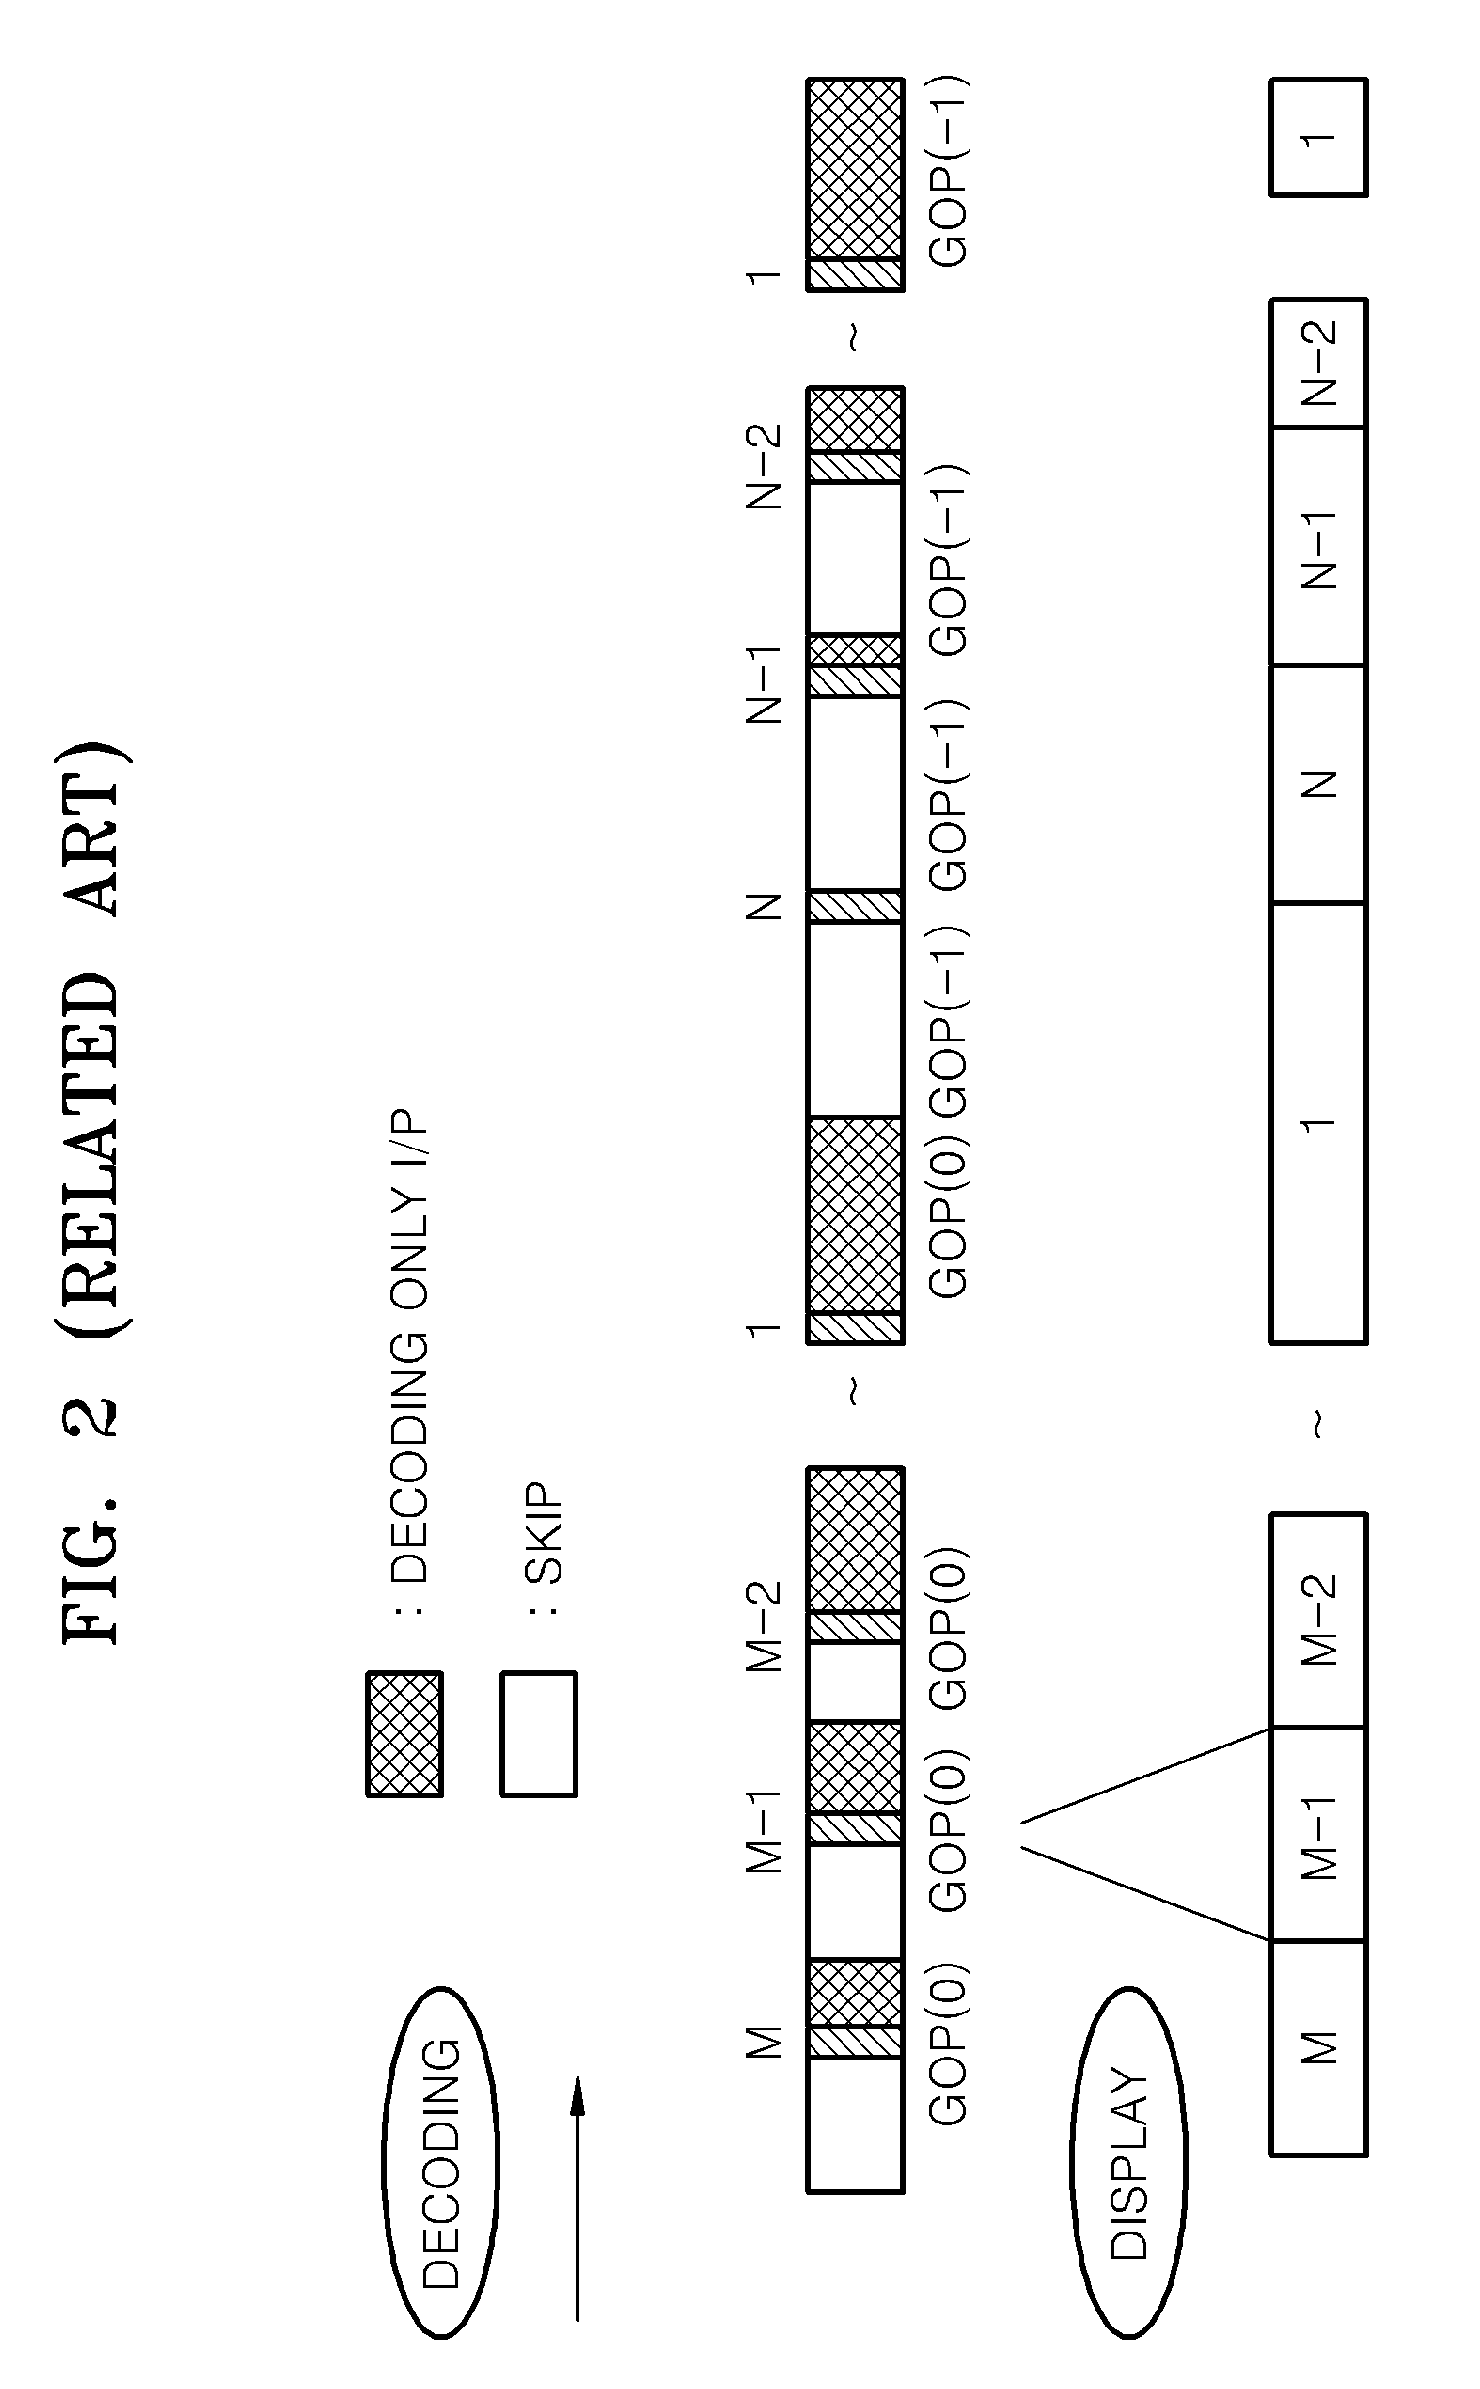 Method and apparatus for normal reverse playback